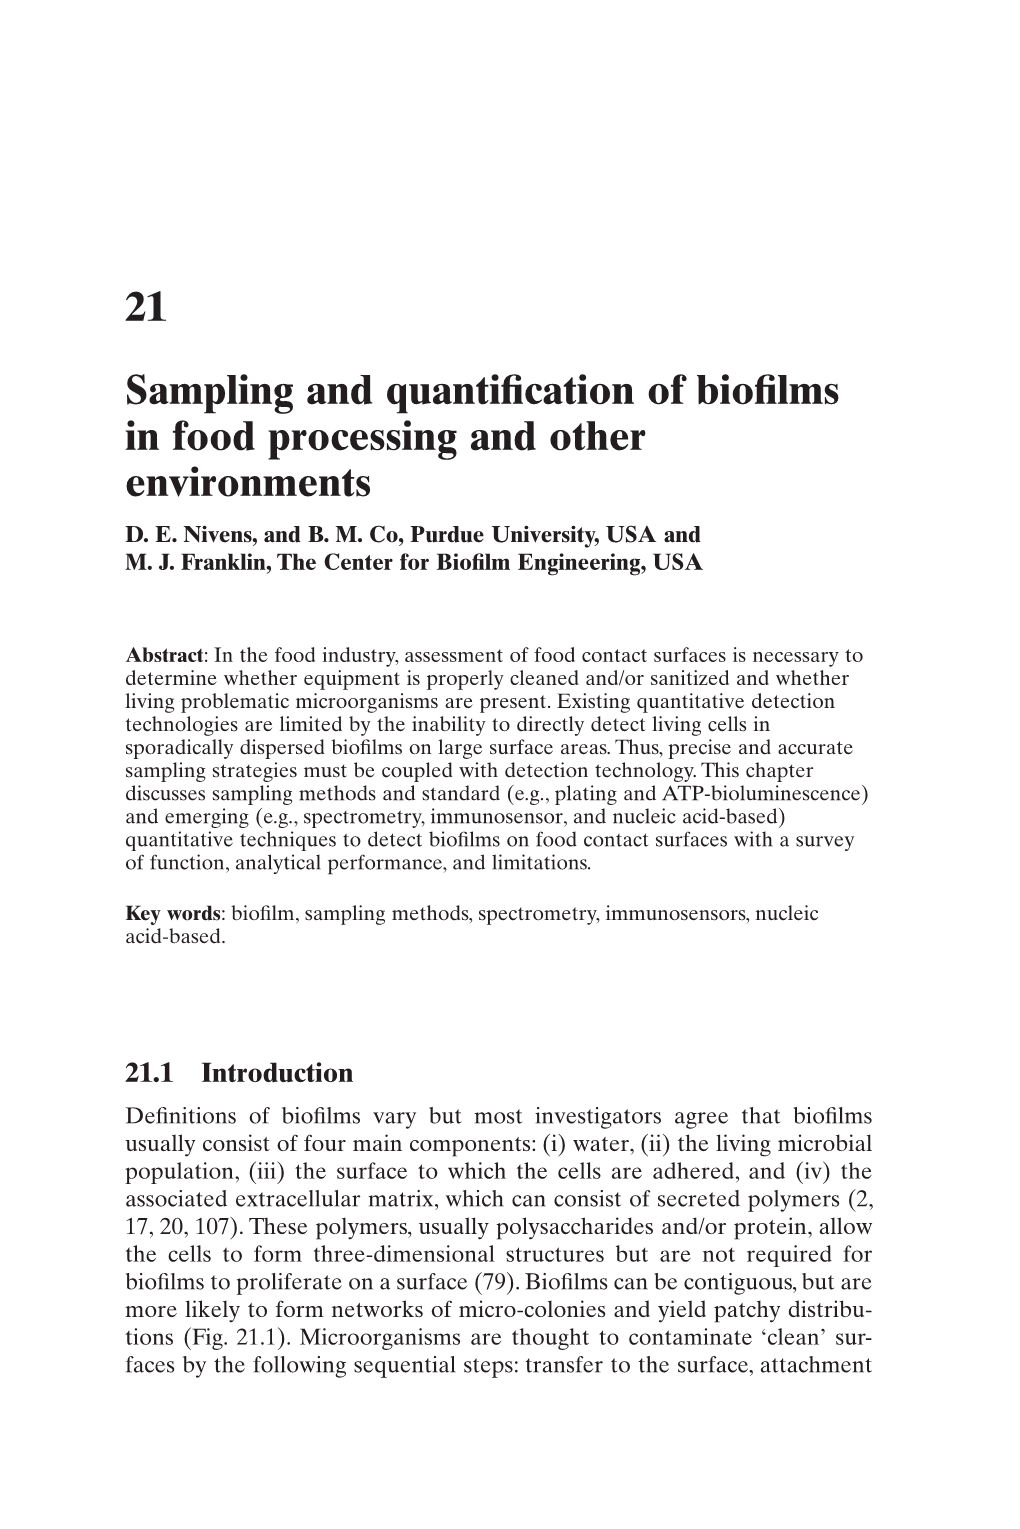 Sampling and Quantification of Biofilms in Food Processing And